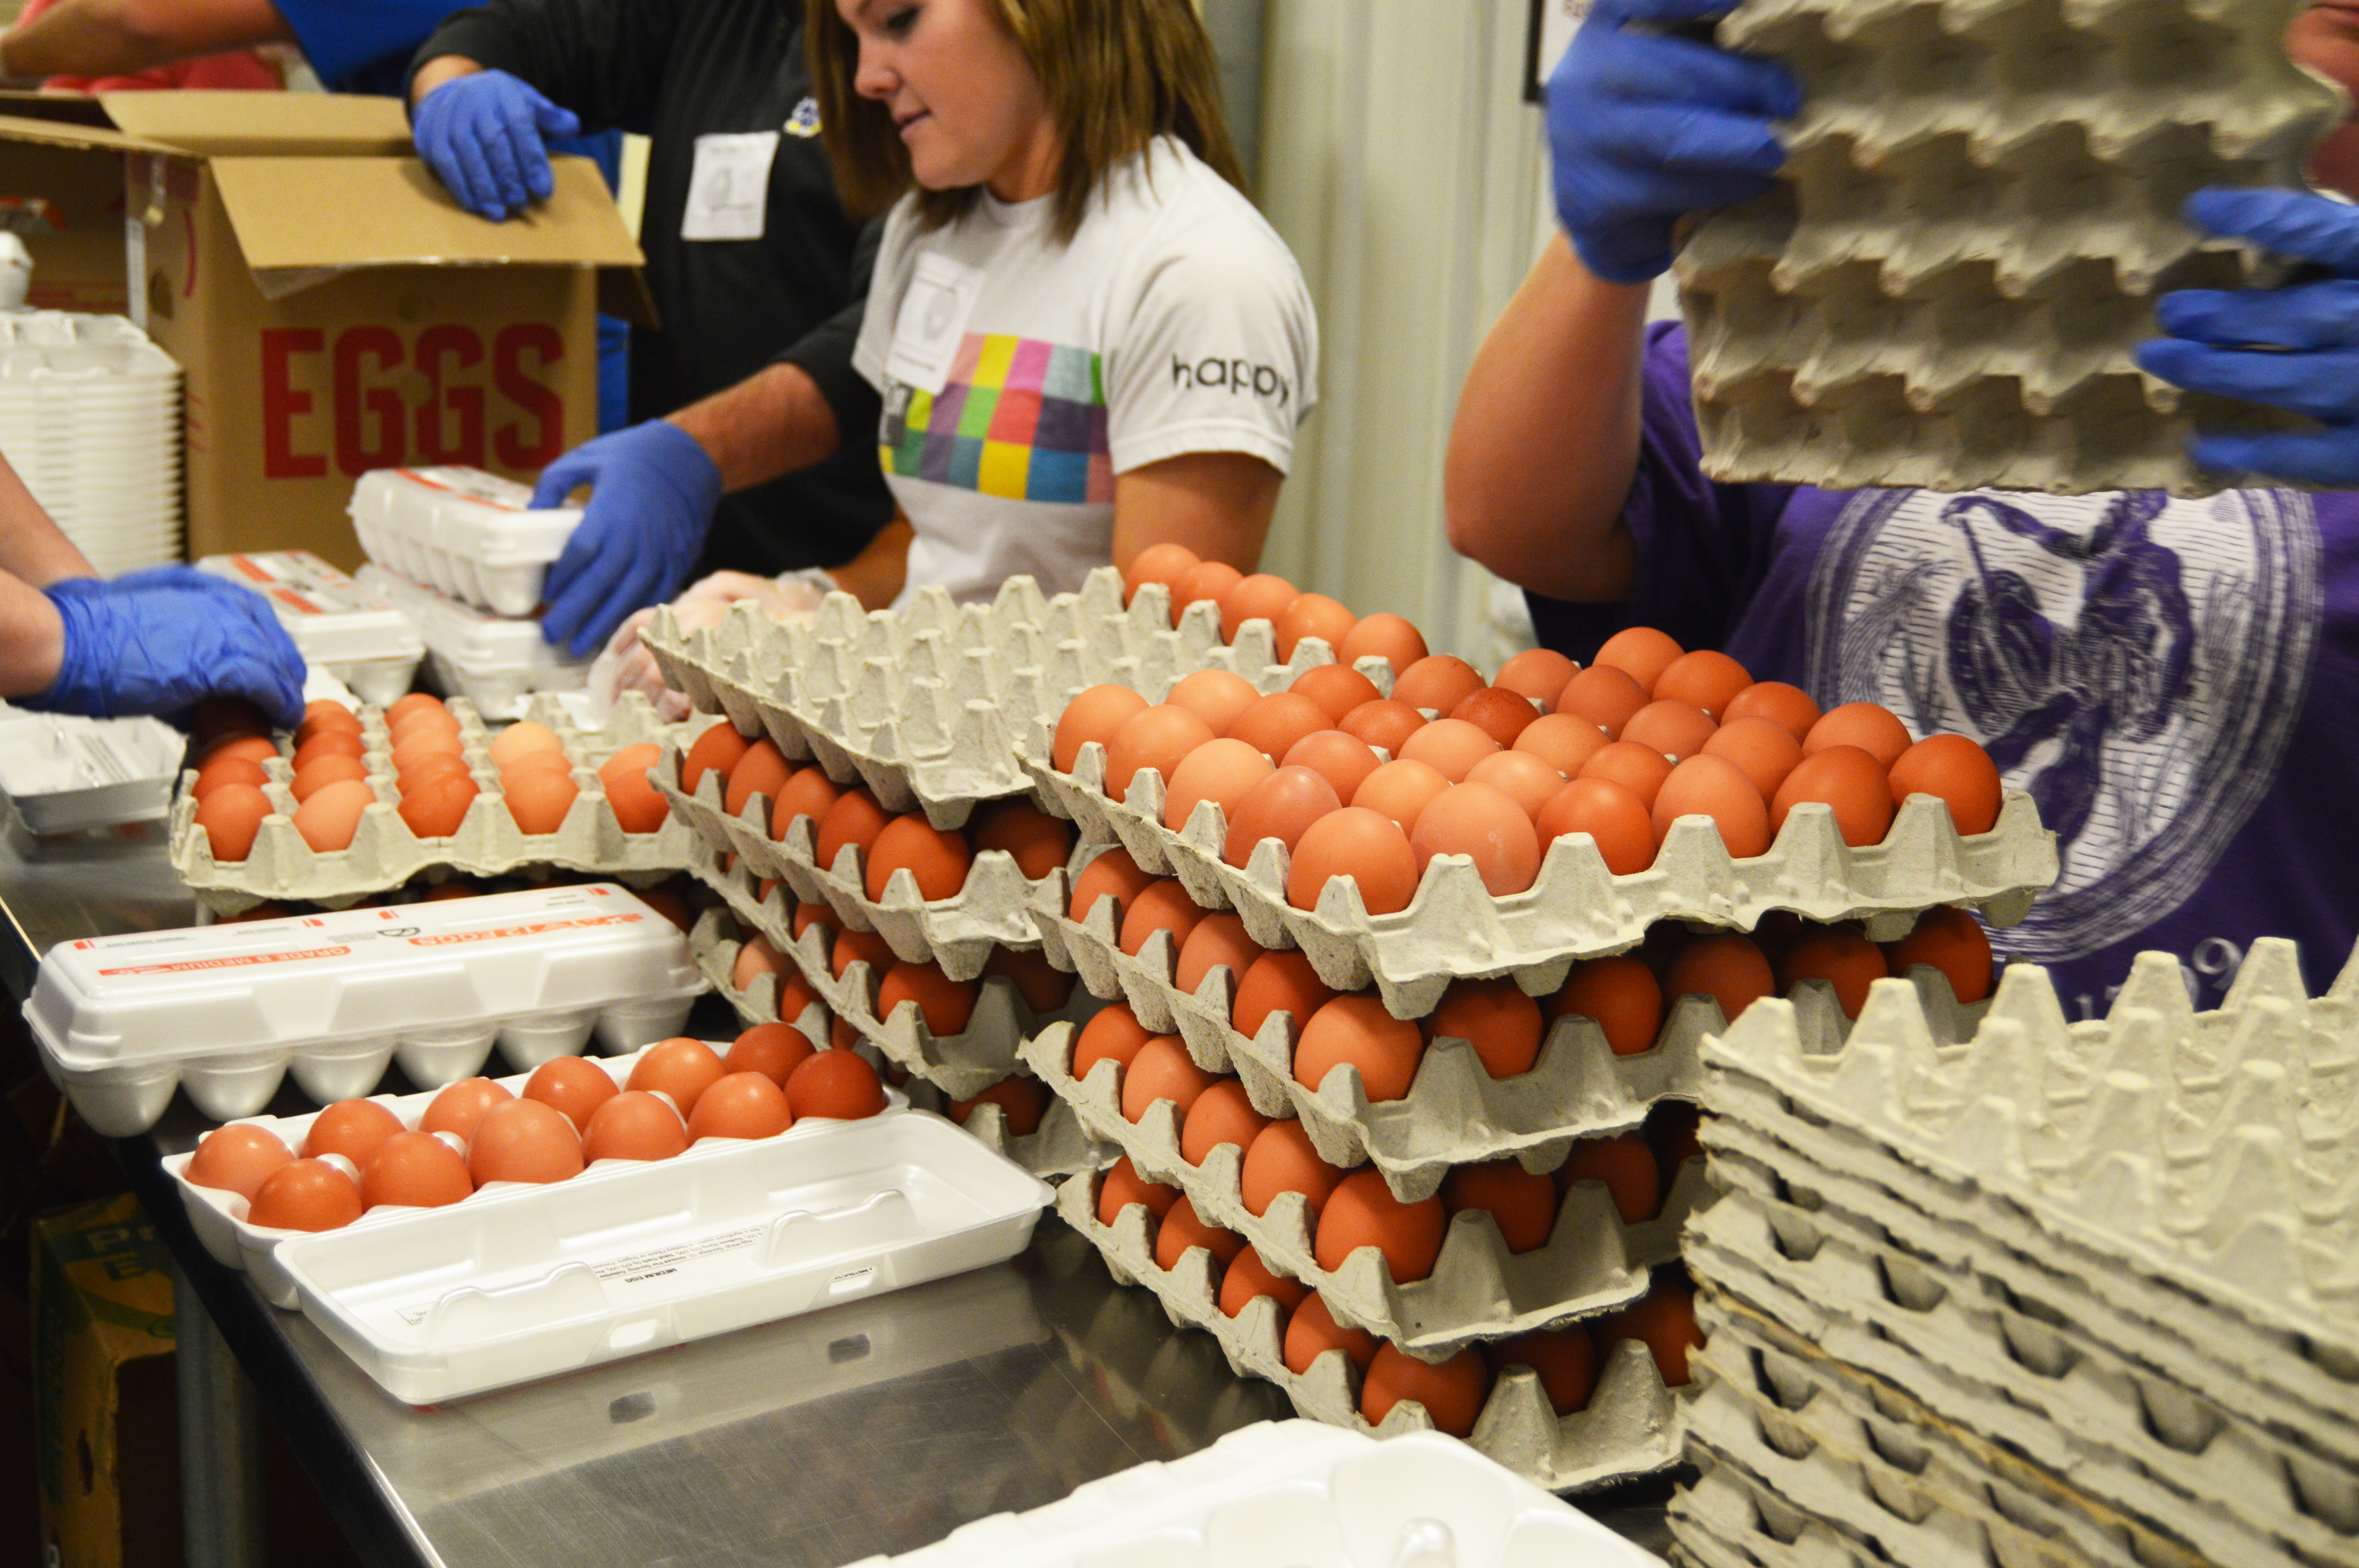 Vital Farms to donate 1 million eggs by 2016